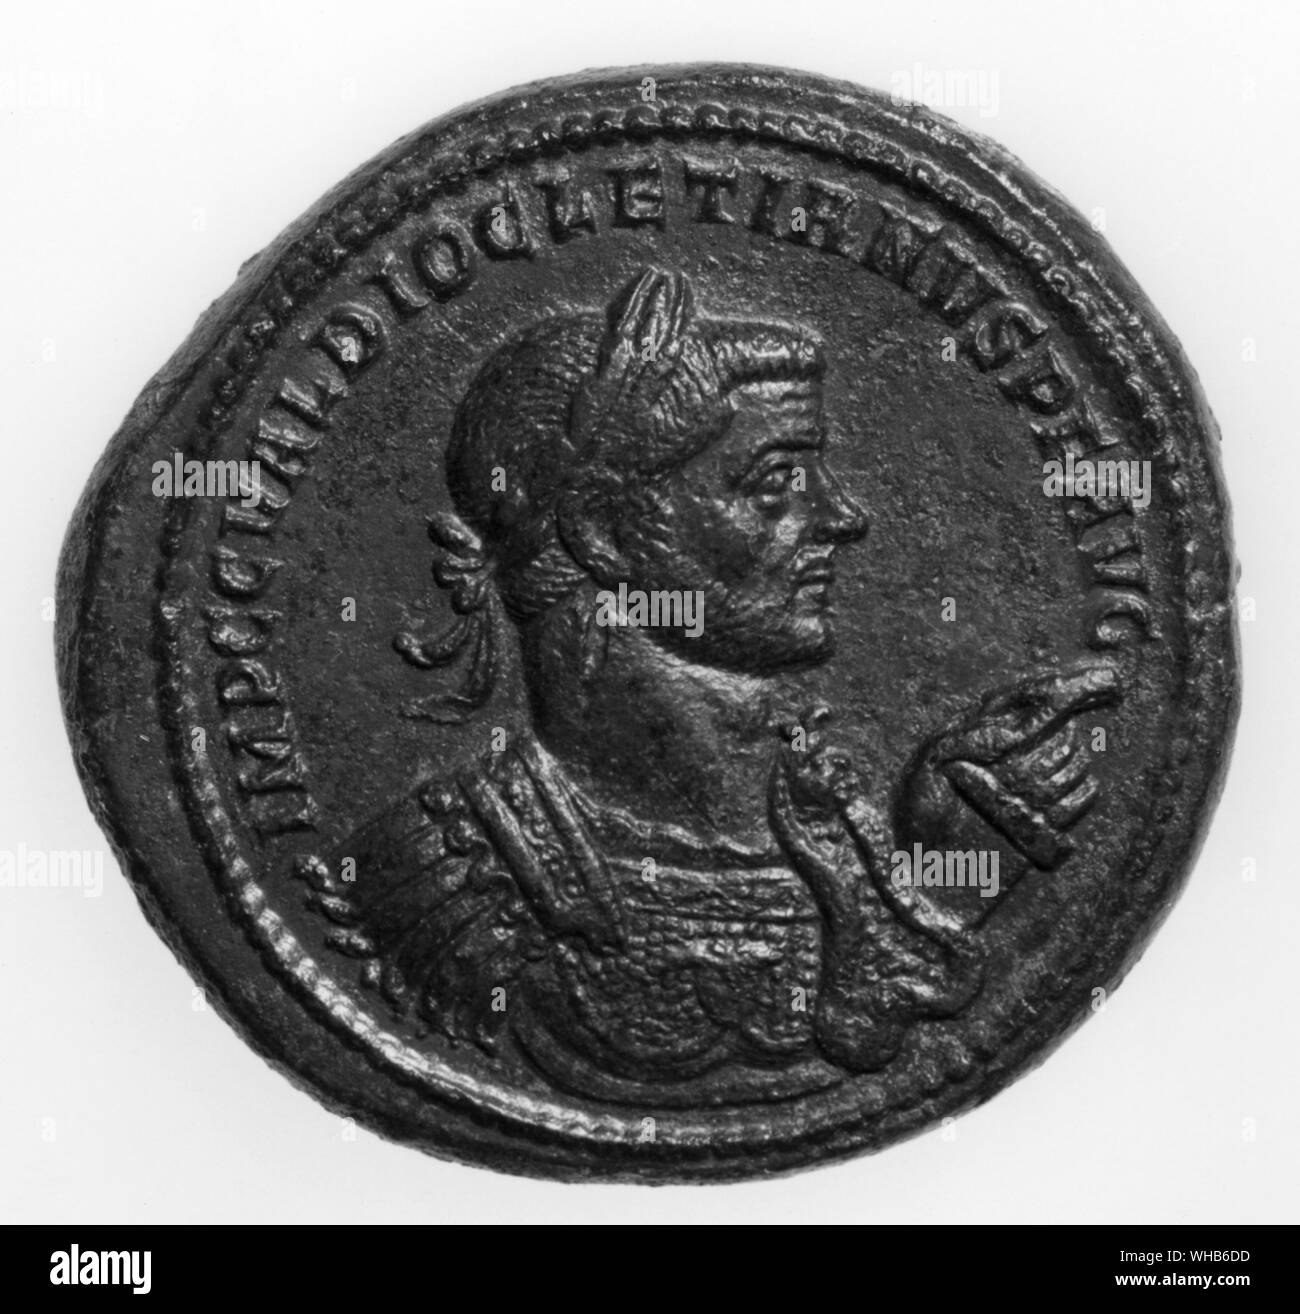 Coin of Diocletian - Gaius Aurelius Valerius Diocletianus (c. 236-316, born Diocles and known in English as Diocletian, was Roman Emperor from 20 November 284 to 1 May 305.. Stock Photo